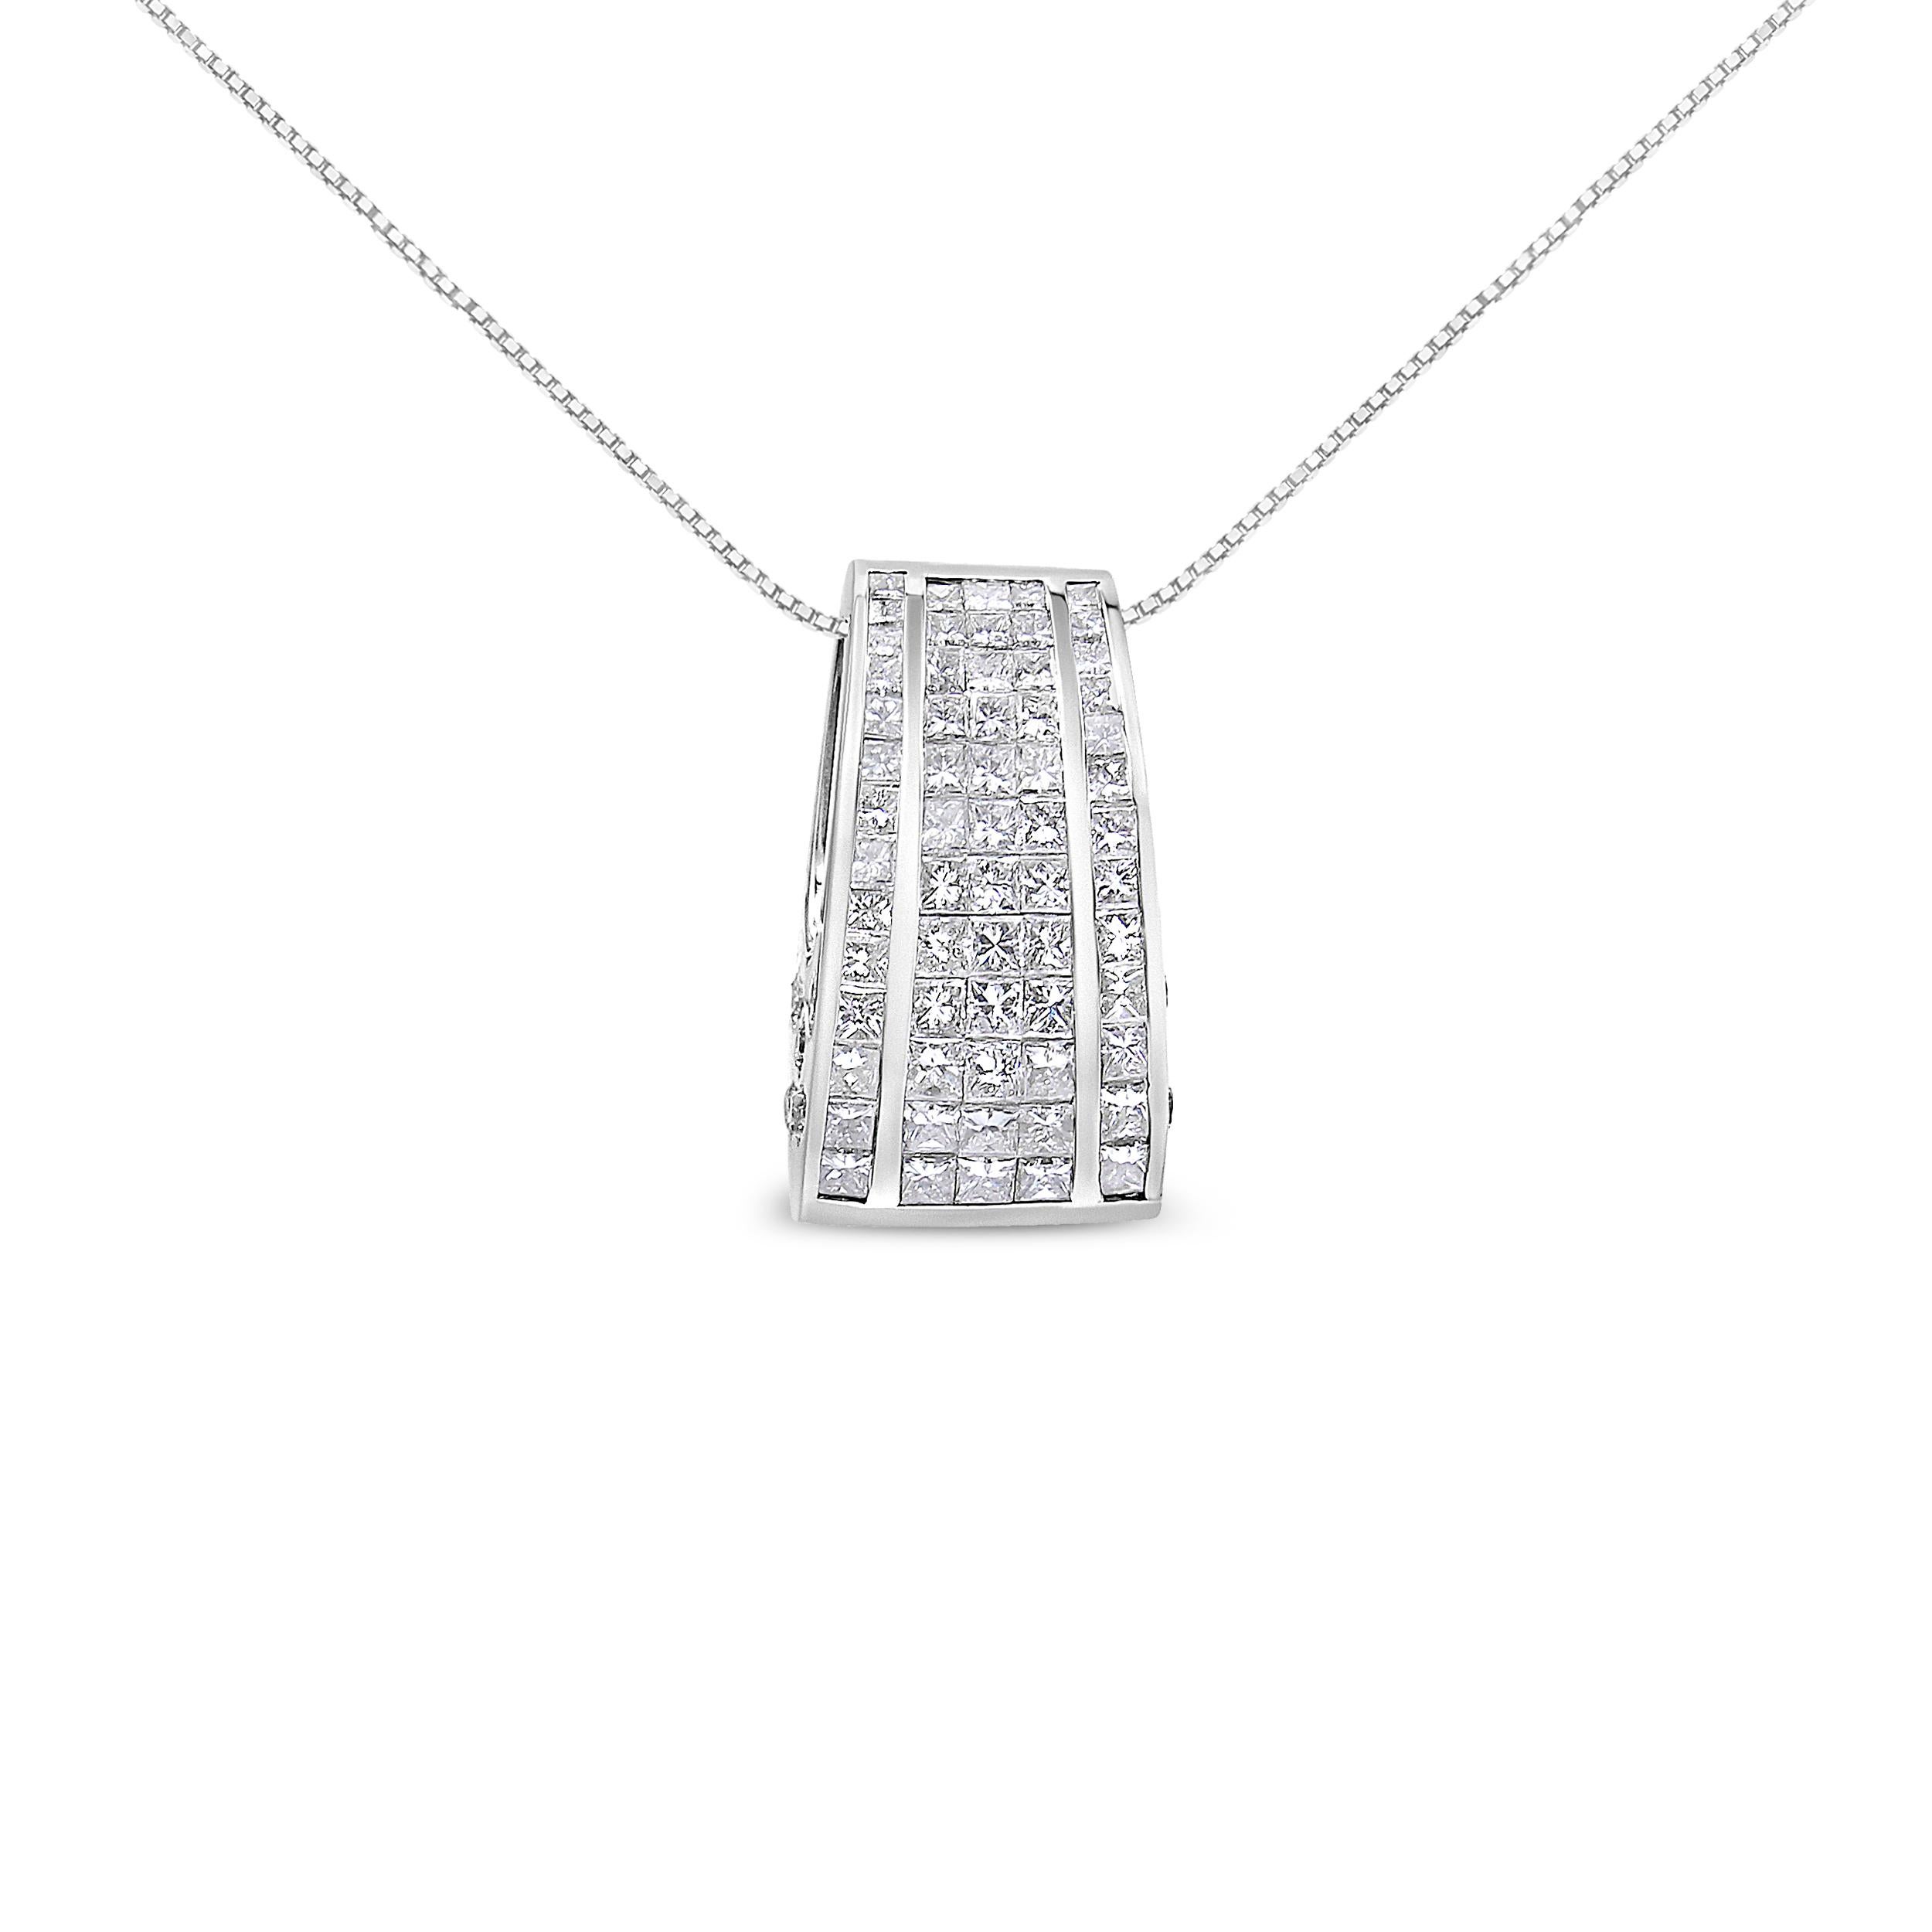 This radiant pendant is adorned with over two carats of alternating round and princess cut diamonds for truly brilliant style. Set in 18 karat white gold, and featuring an intricate cut-out design at the sides, it's a piece that always gets